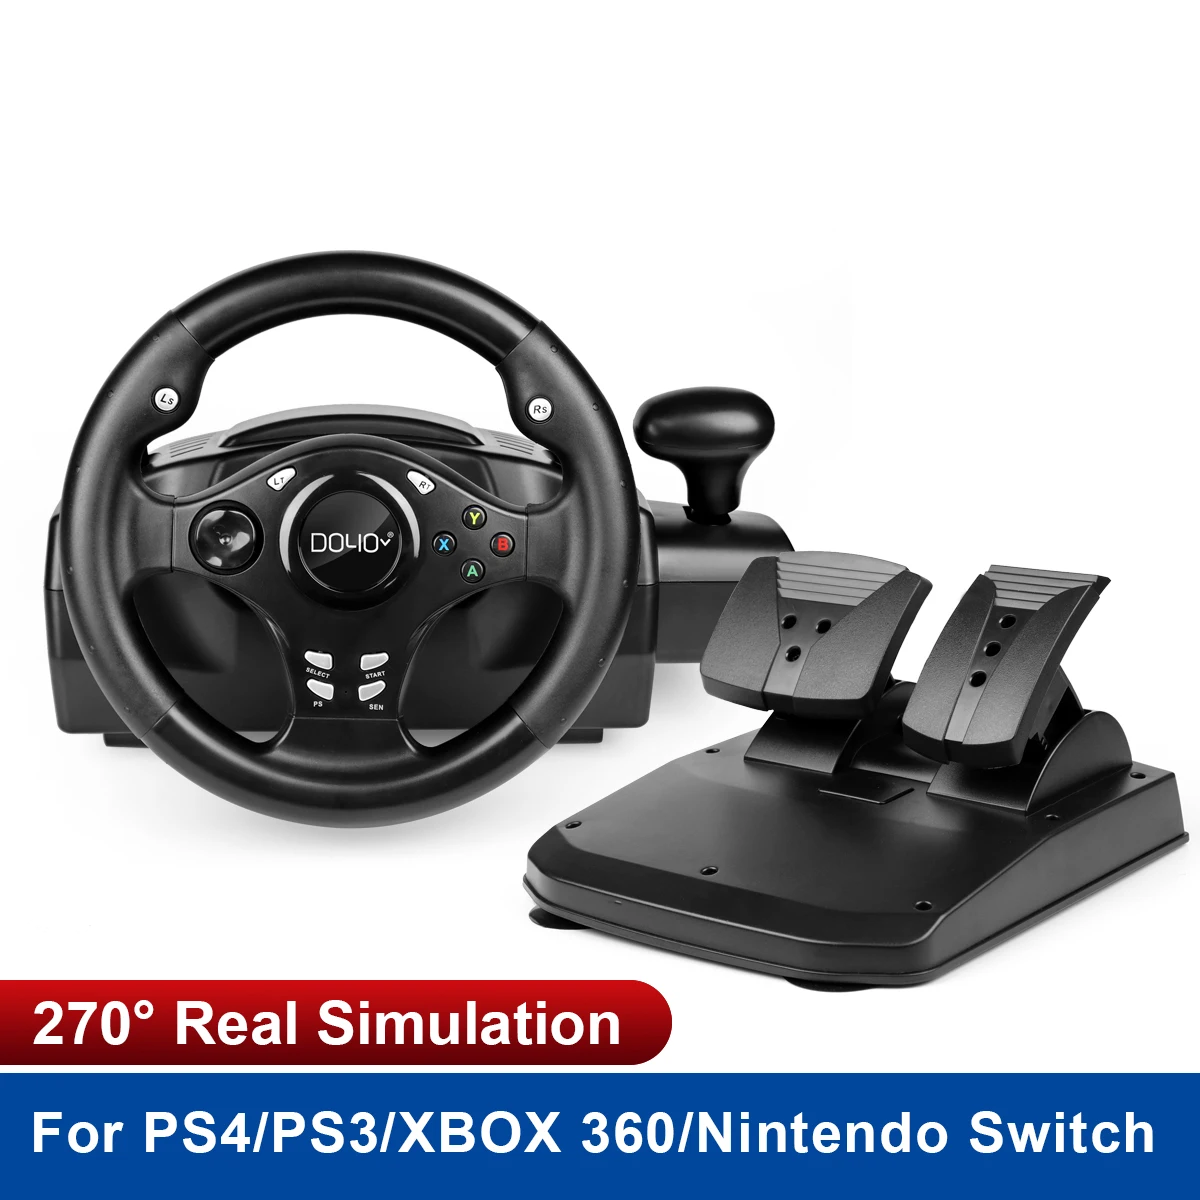 

Game Racing Whee 180° Rotation For PS4/PS3/XBOX 360/XBOX ONE/ANDROID/Switch/PC For Game DiRT 4 USB Dual Vibration Pedal Wheels